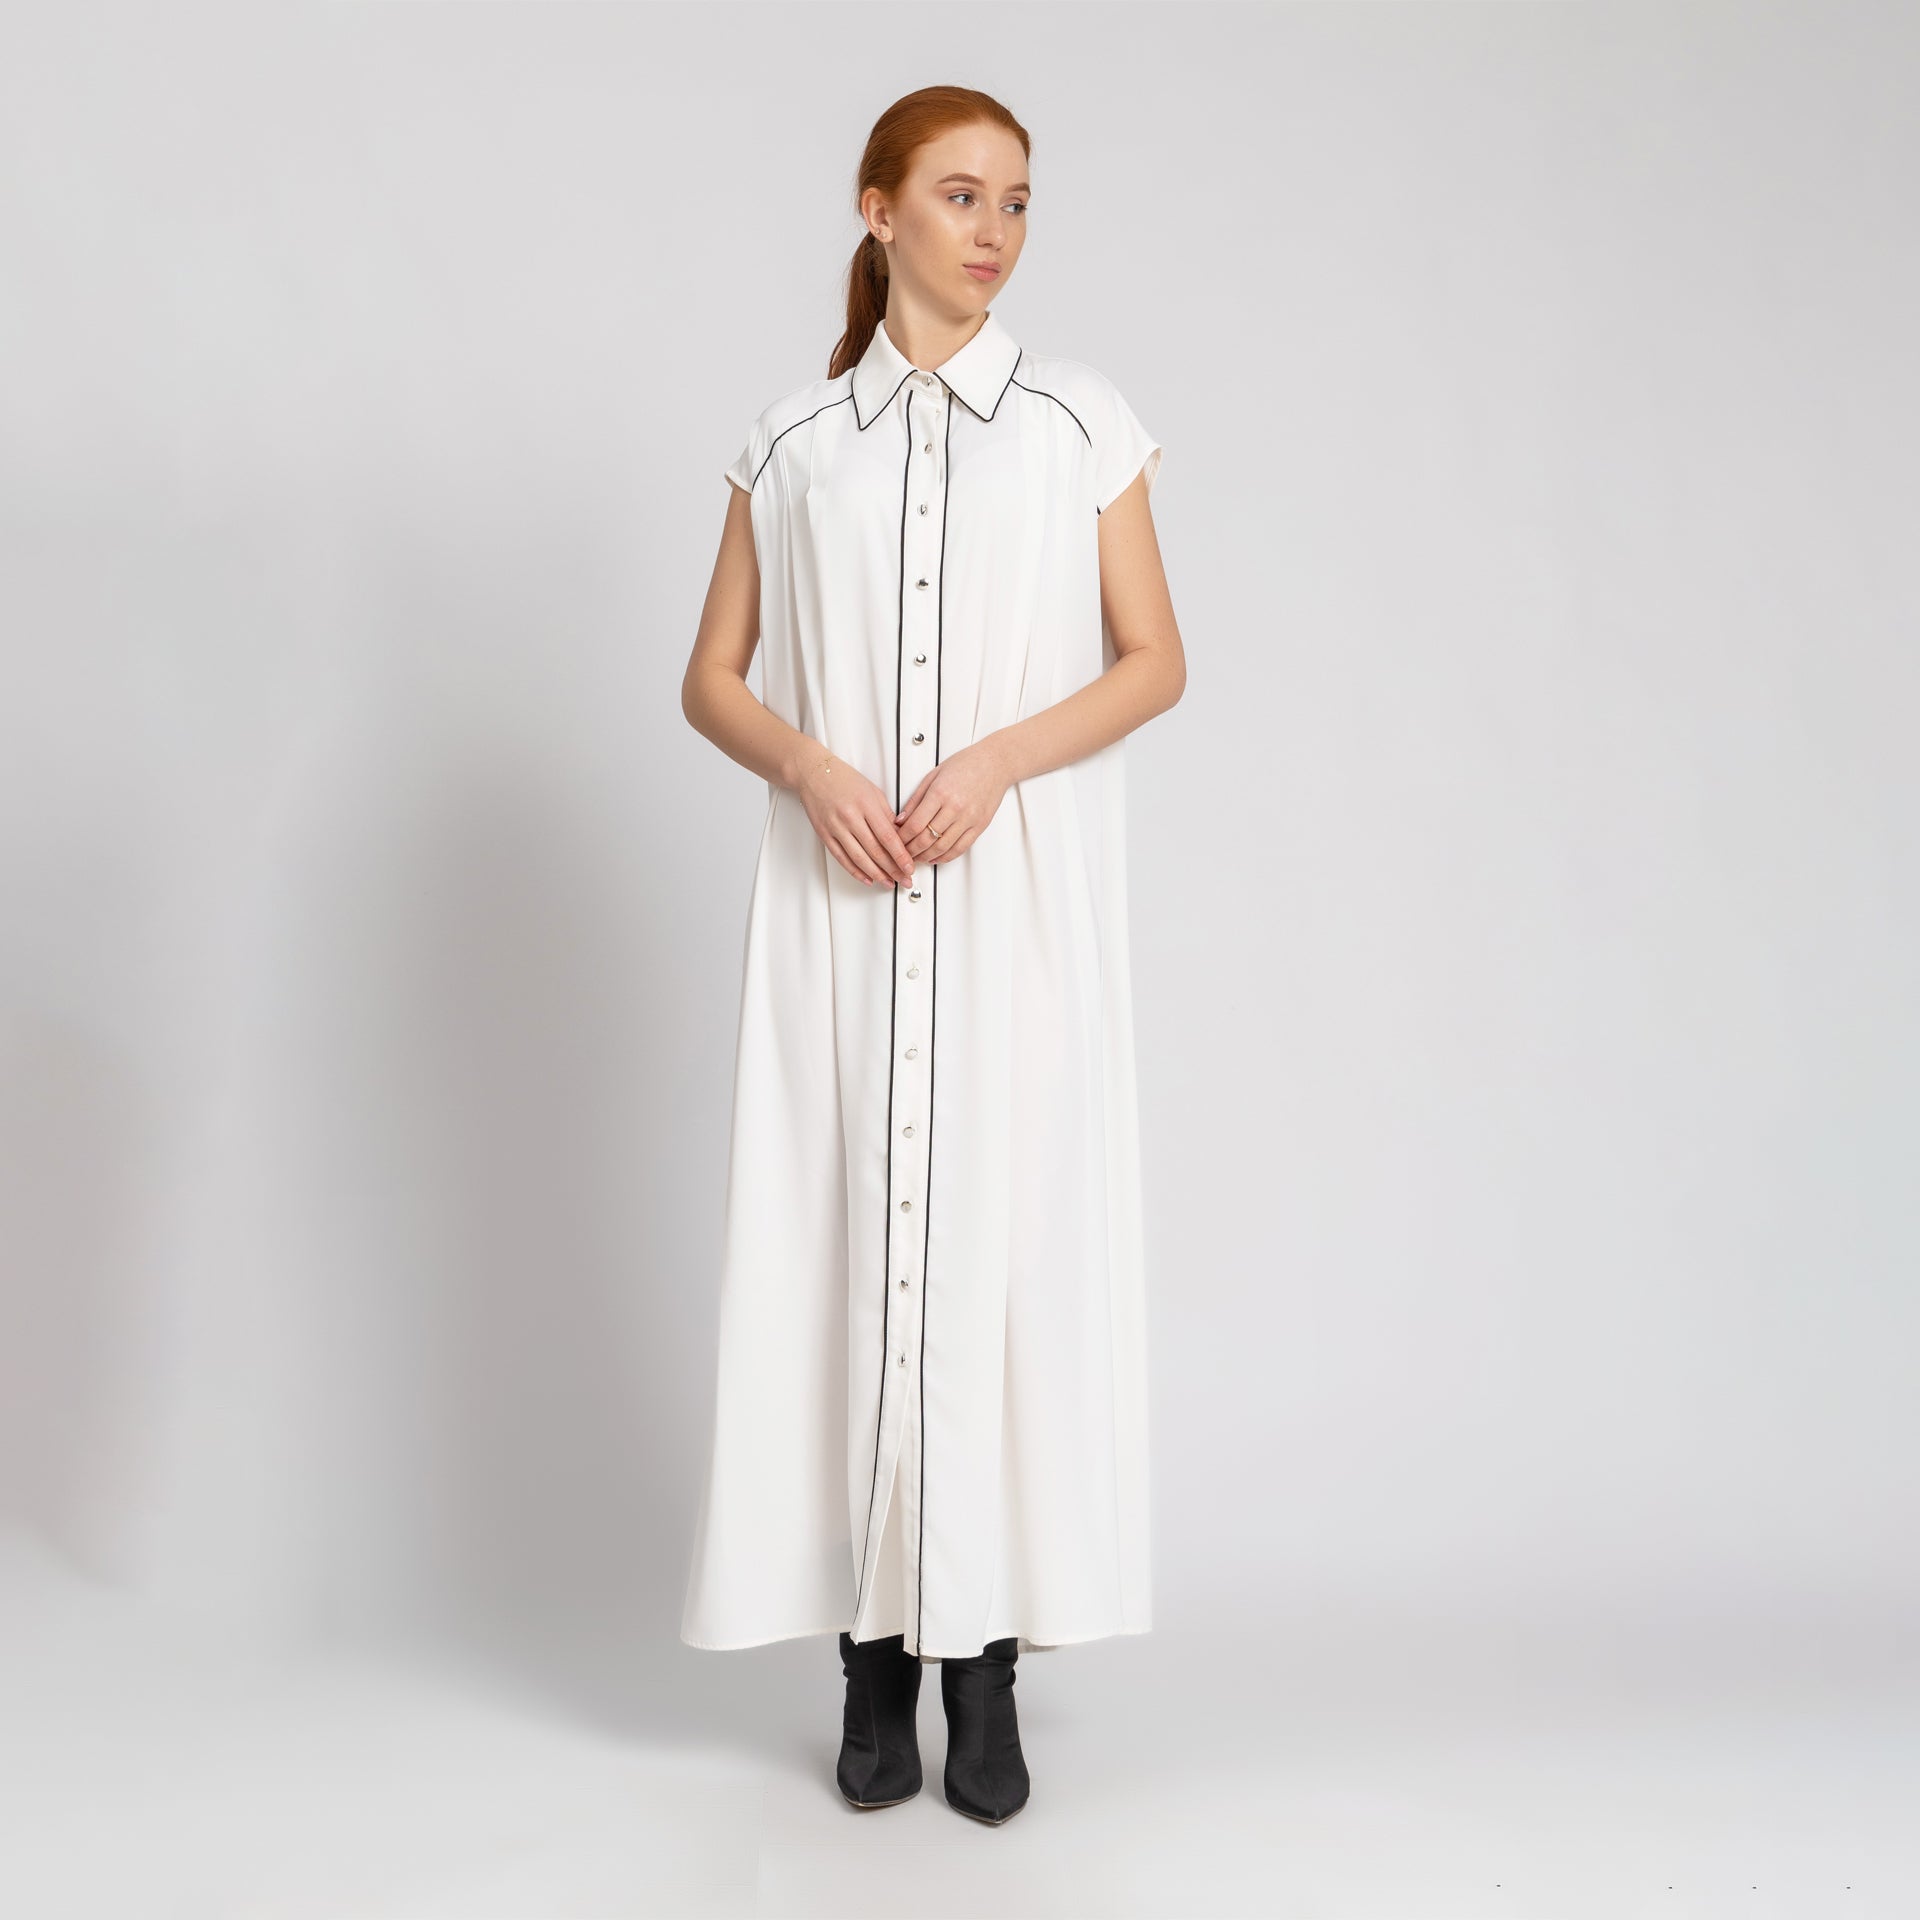 White Long Crepe Dress With Black Trim From Elanove